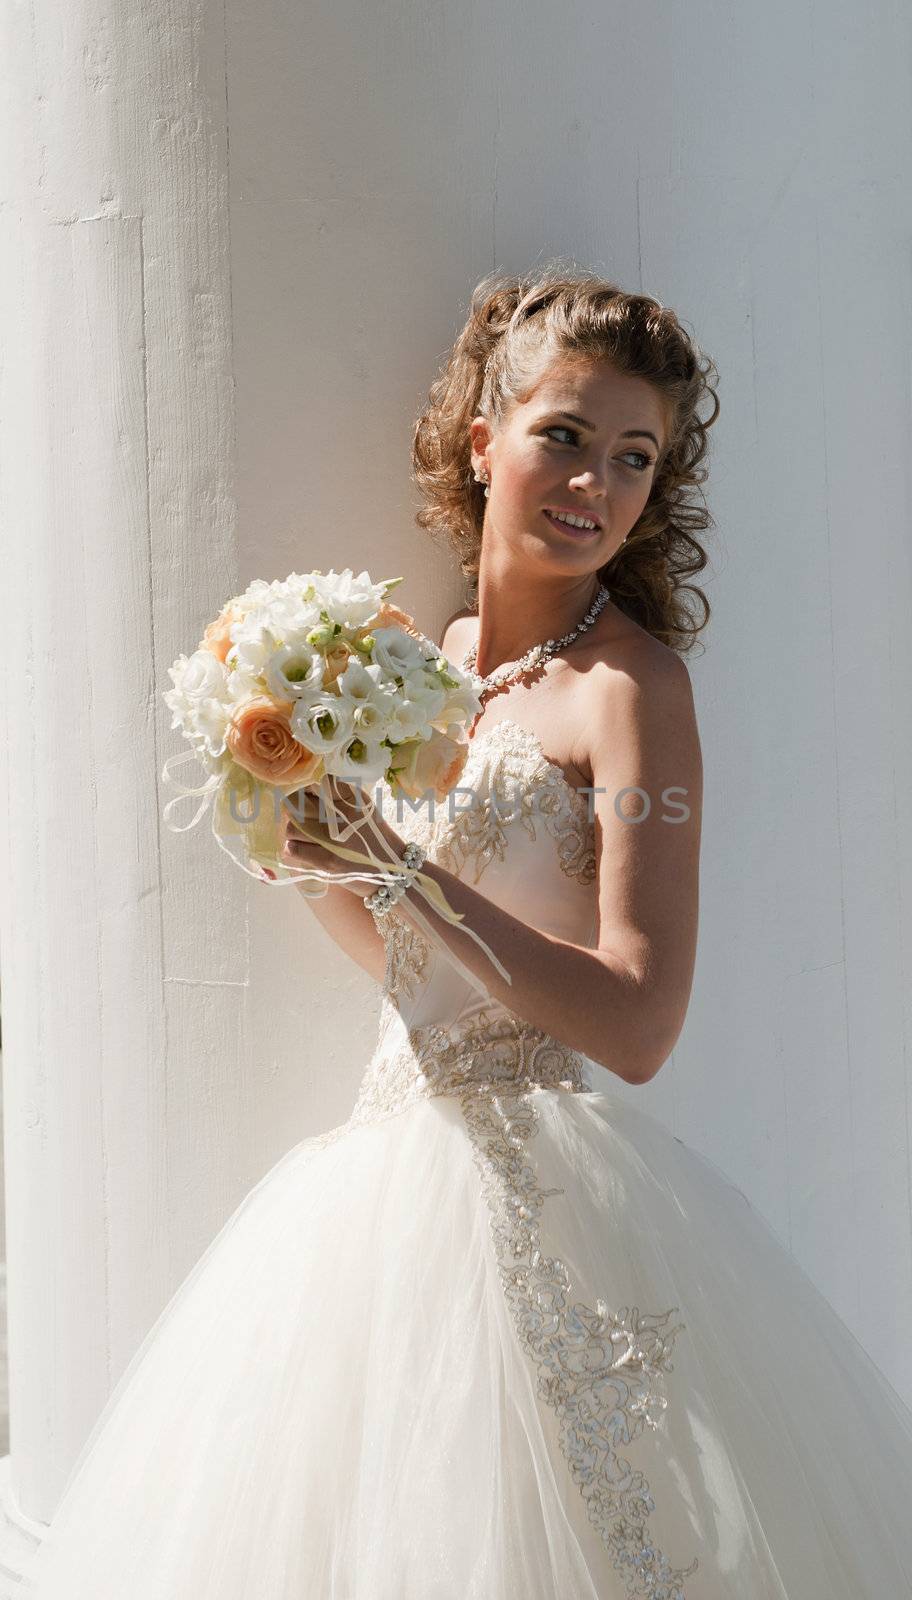 The bride with a bouquet.  by SURZ